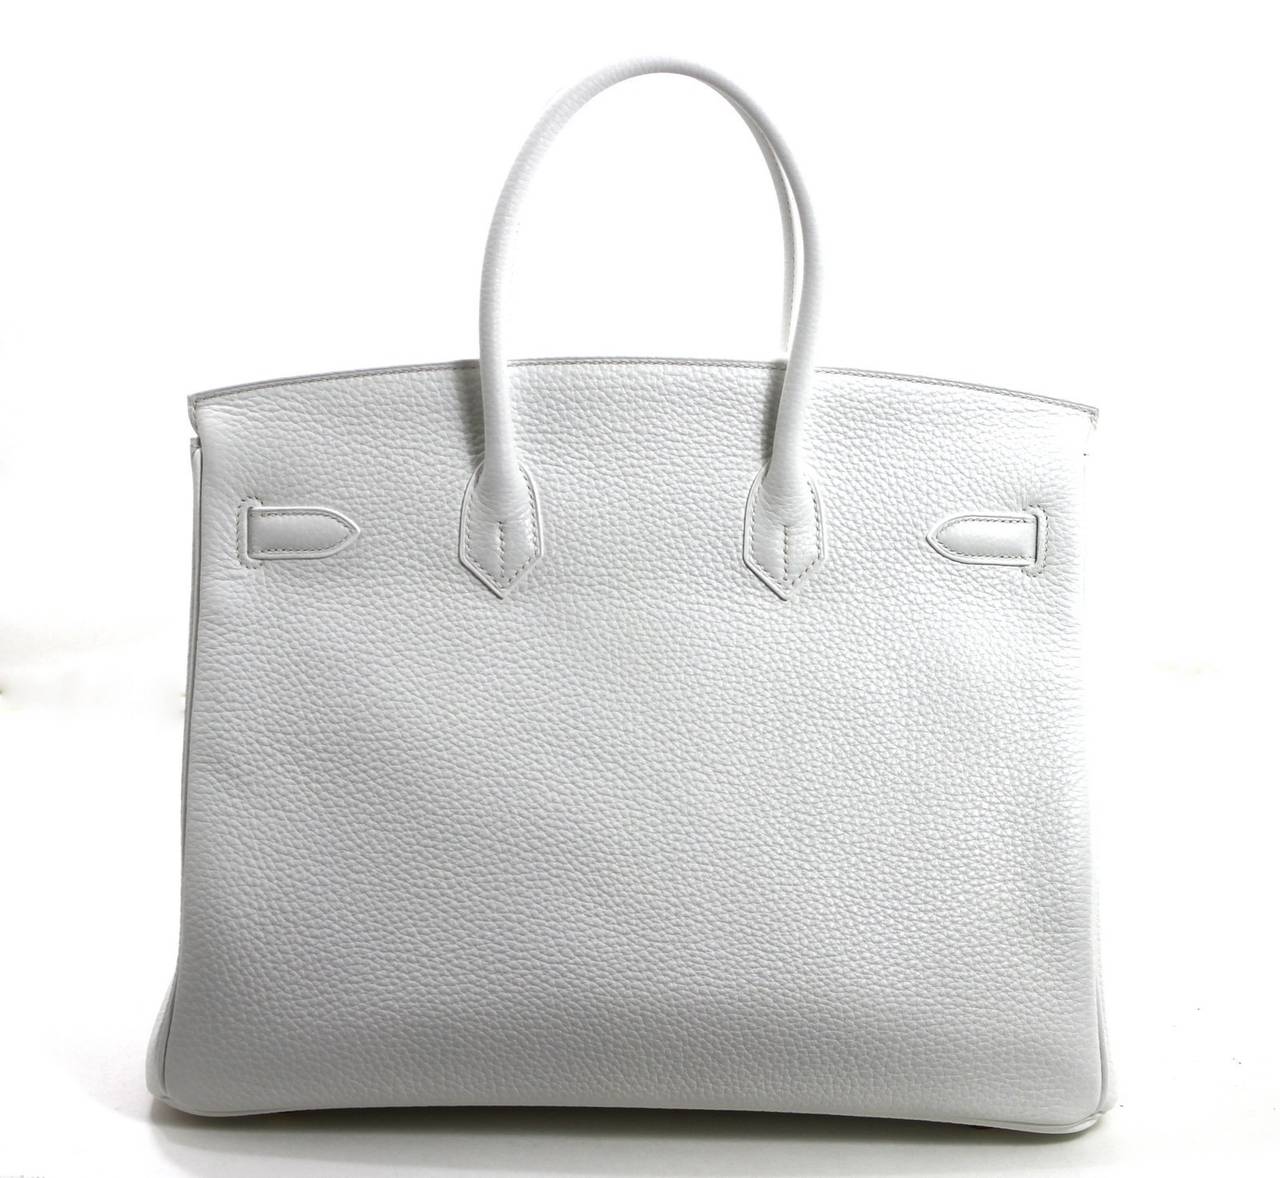 In pristine condition, this Hermès White Clemence Leather 35 cm Birkin has never been carried.  The protective plastic is intact on the gold hardware and the felt has been removed for photography purposes only.     Considered the ultimate luxury